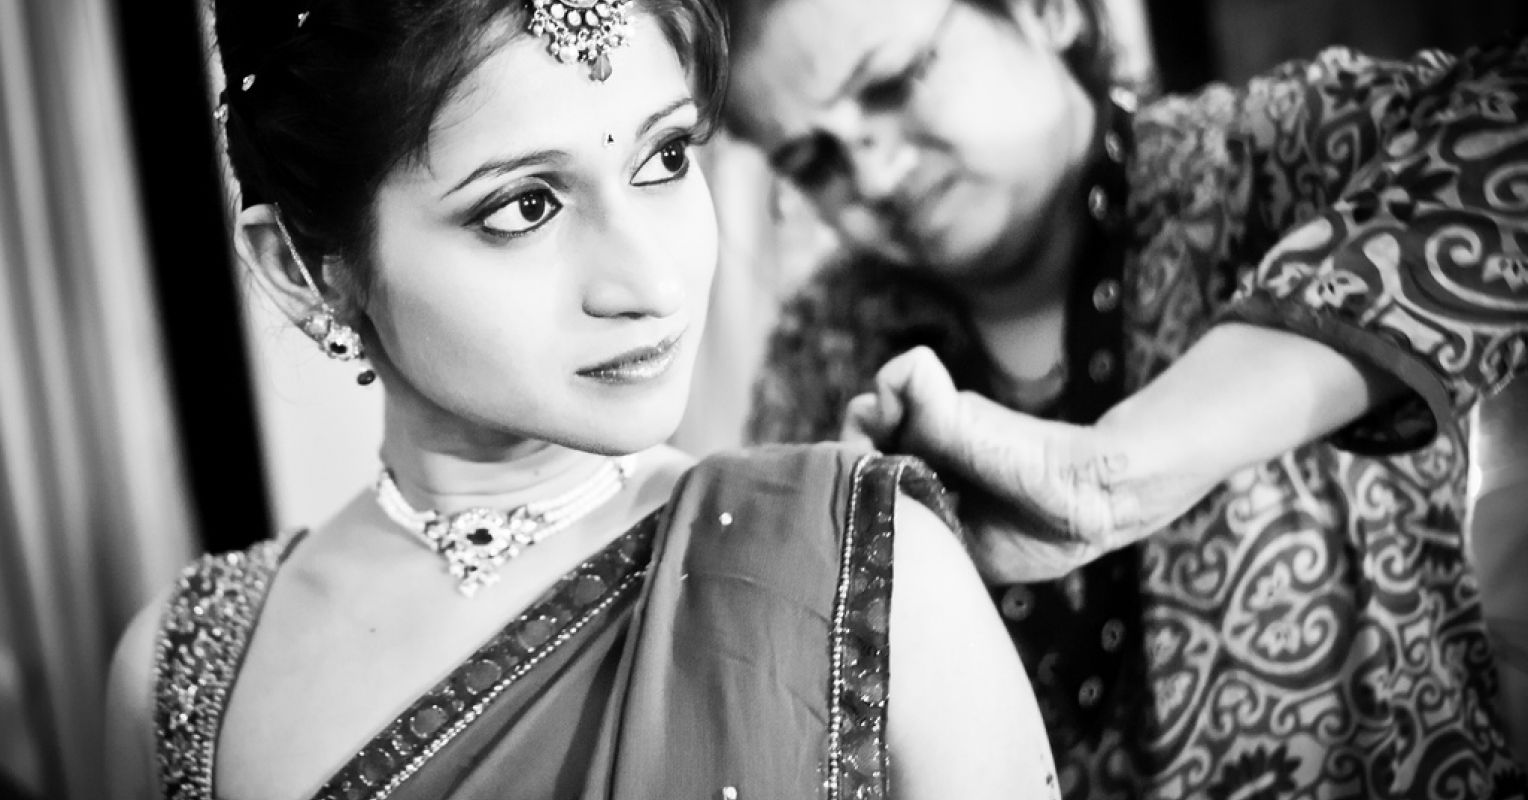 Why Are So Many Indian Arranged Marriages Successful? Psychology Today pic